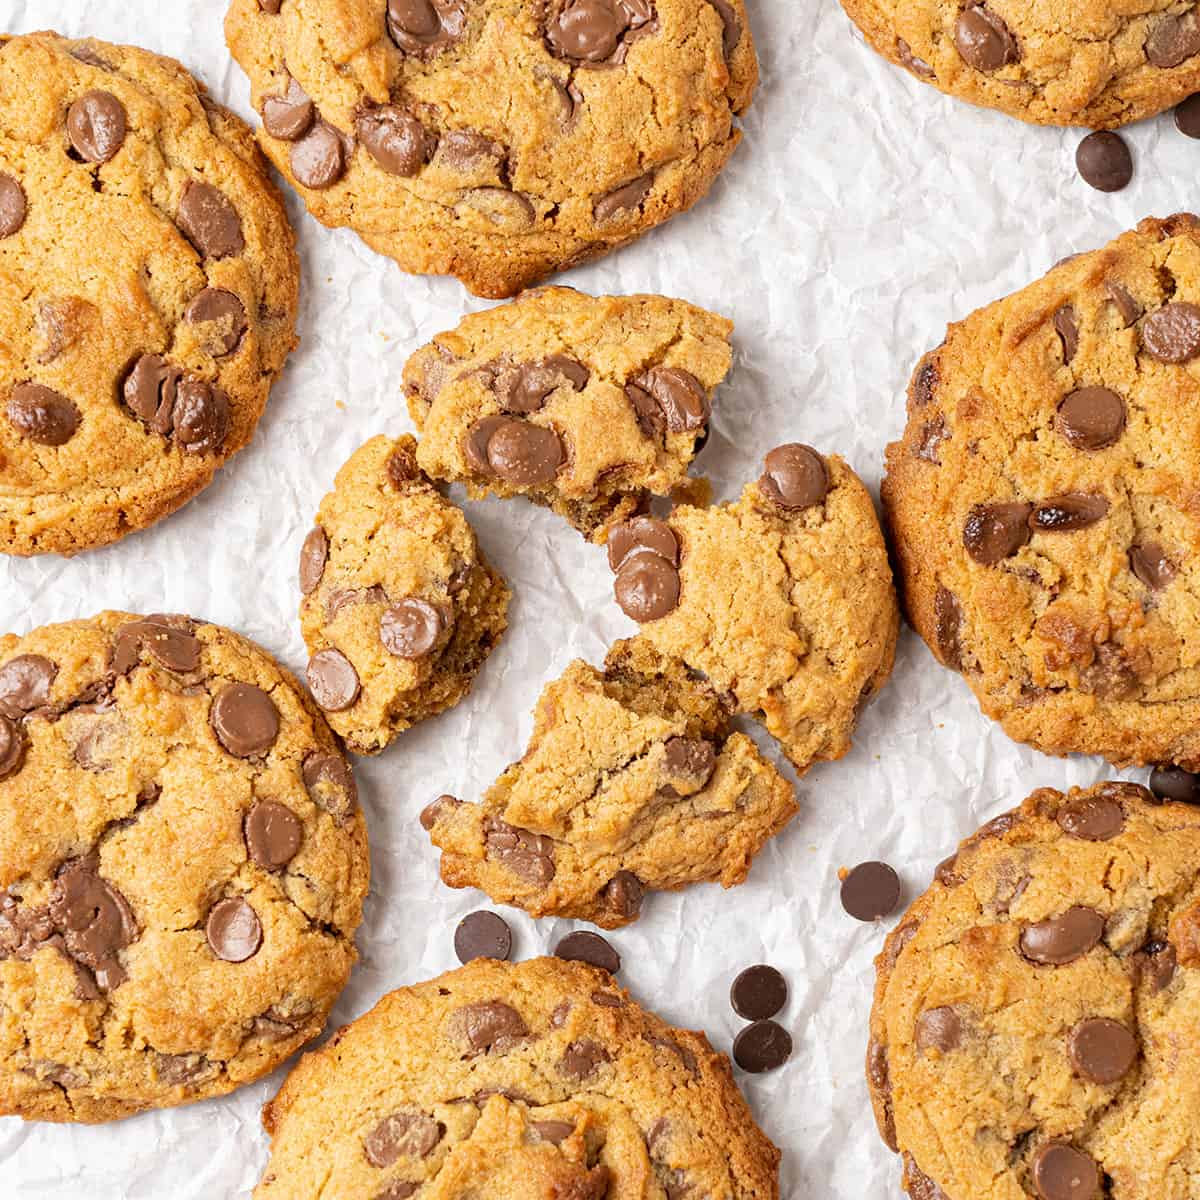 <p>These irresistible soft batch <strong><a href="https://www.spatuladesserts.com/cream-cheese-chocolate-chip-cookies/">cream cheese chocolate chip cookies</a></strong> are so chocolatey, moist, and flavorful that it’ll be hard to resist sinking your teeth into a second or third! Made with just some essential pantry ingredients, this easy cookie recipe is the perfect dessert to serve for special occasions and a casual dessert to keep in the kitchen cookie jar. It won’t be long before it becomes the family’s favorite chocolate chip cookie recipe, in fact, it is our favorite cookies that do not harden!</p><p><strong>Go to the recipe: <a href="https://www.spatuladesserts.com/cream-cheese-chocolate-chip-cookies/">Cream Cheese Chocolate Chip Cookies</a></strong></p>